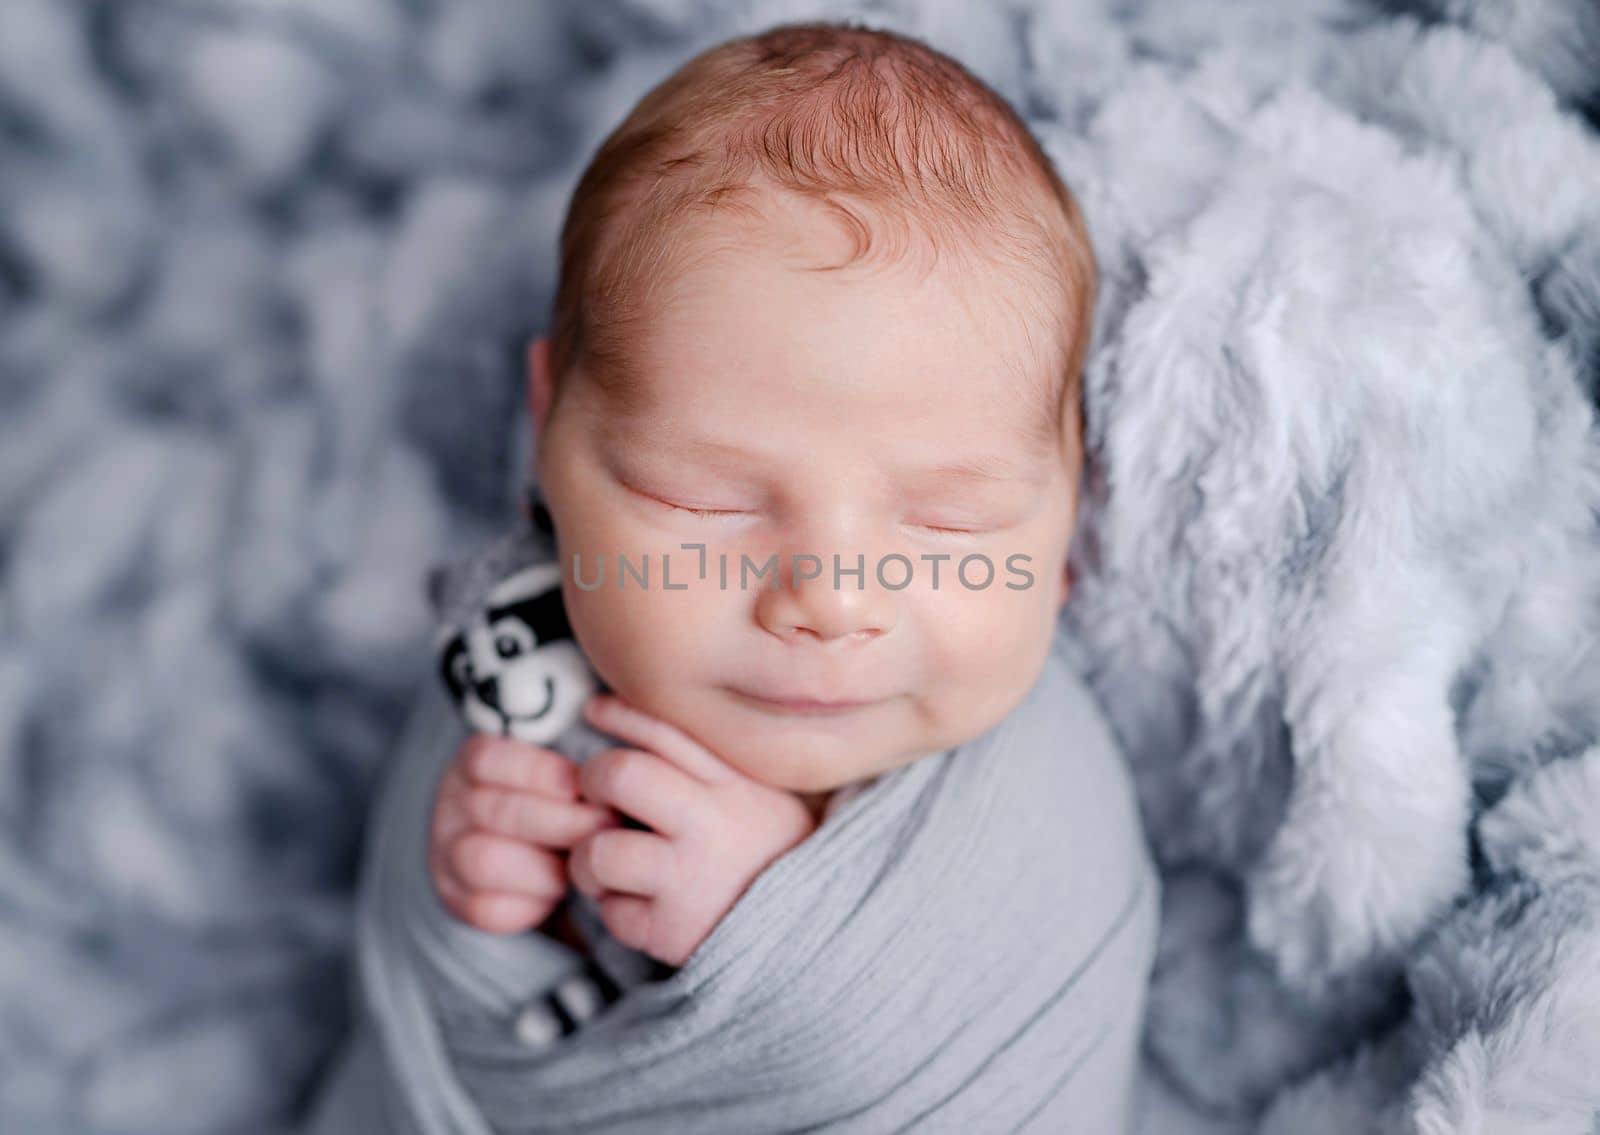 Cute newborn baby boy swaddled in grey fabric holding toy and sleeping on fur blanket. Adorable infant child kid napping studio portrait